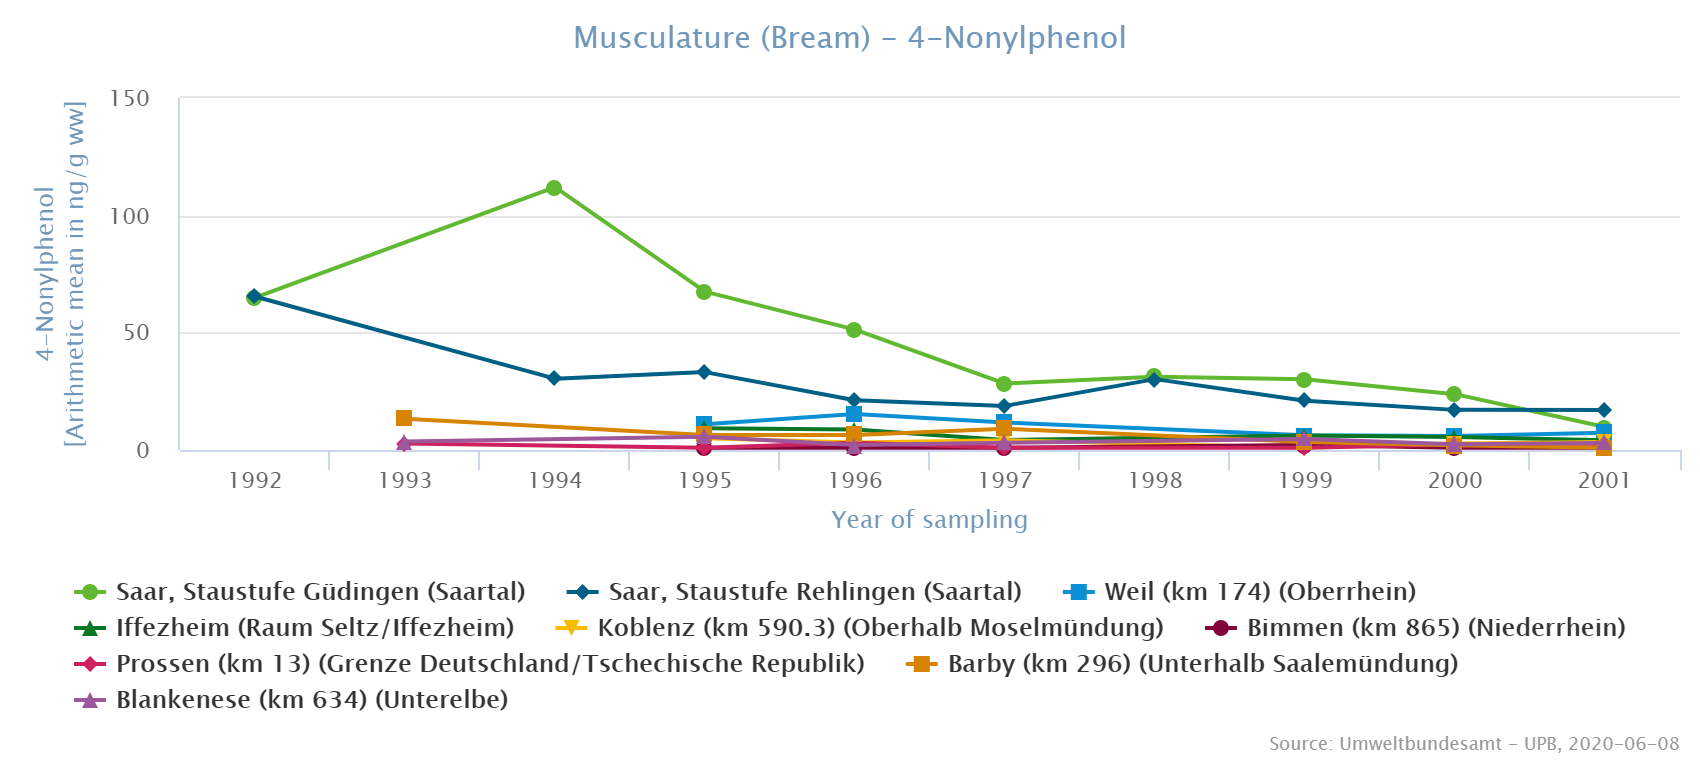 Highest contamination was observed in bream from the Saar sampling site Güdingen with 4NP.